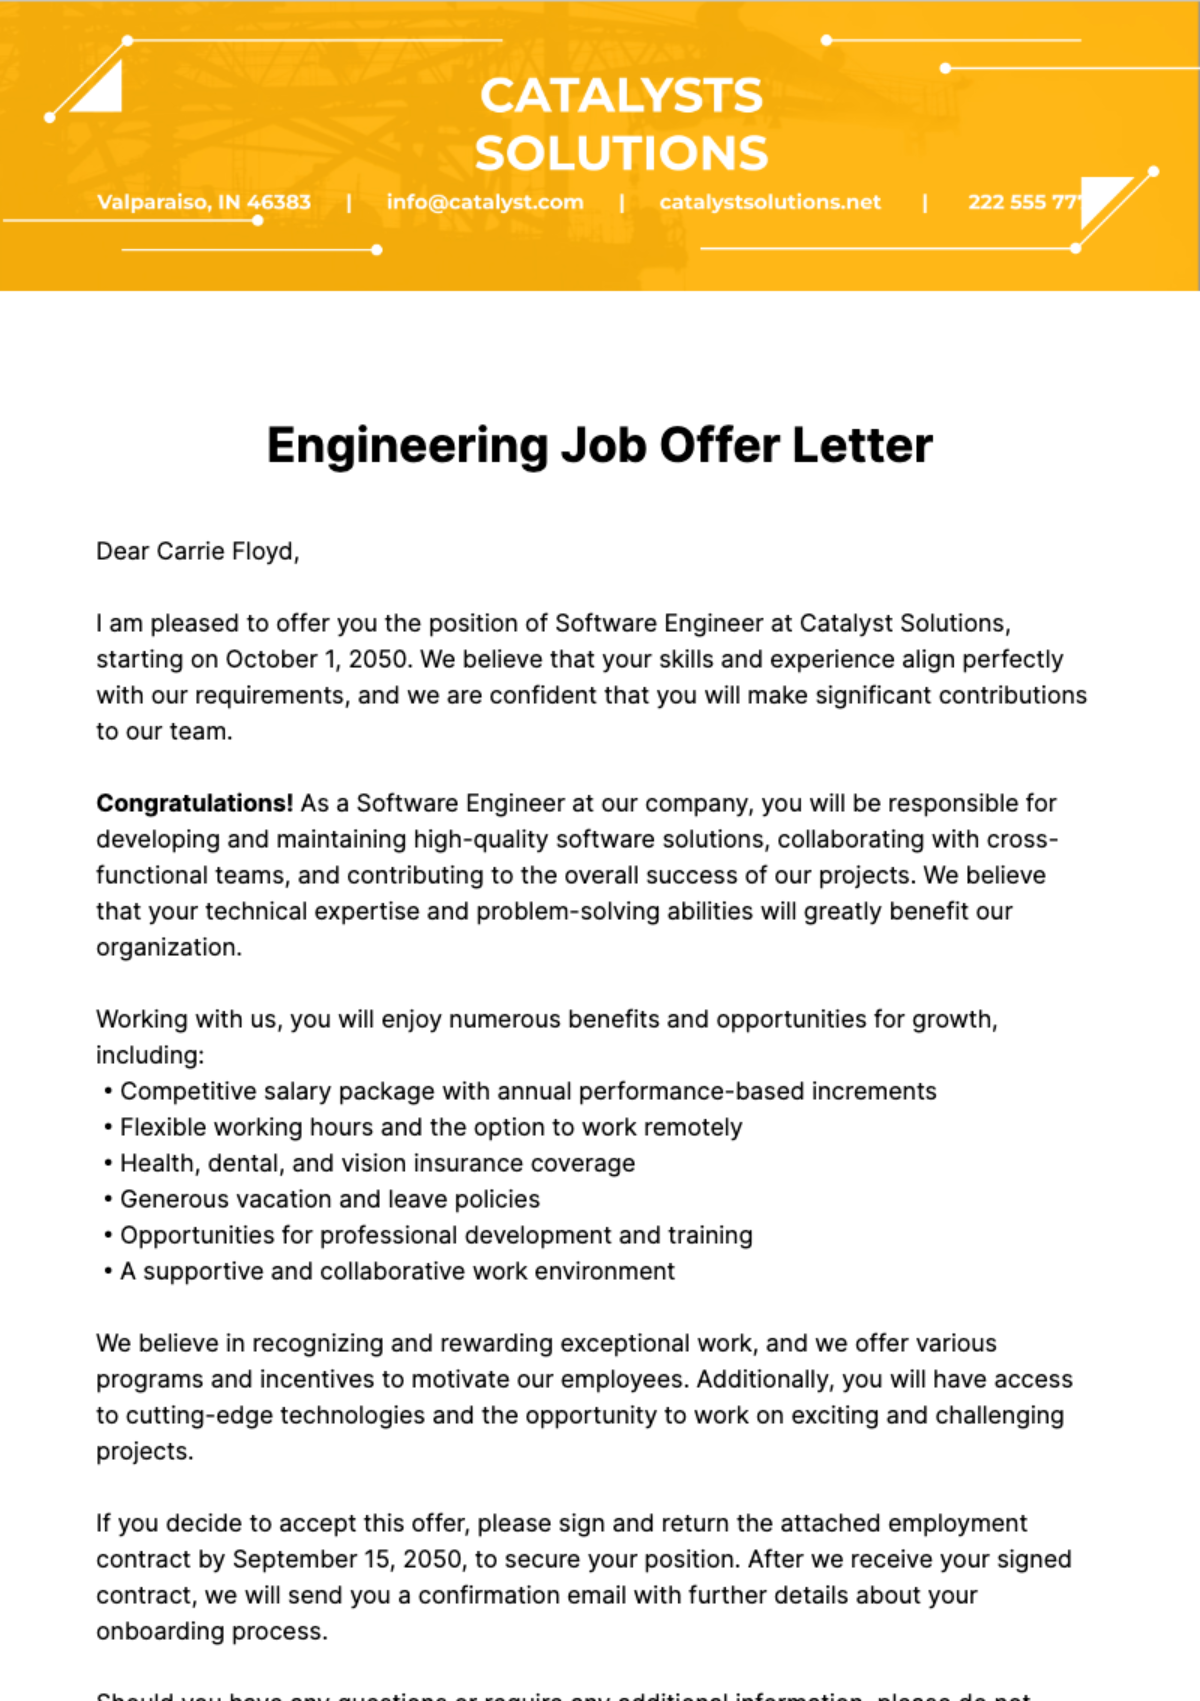 Engineering Job Offer Letter  Template